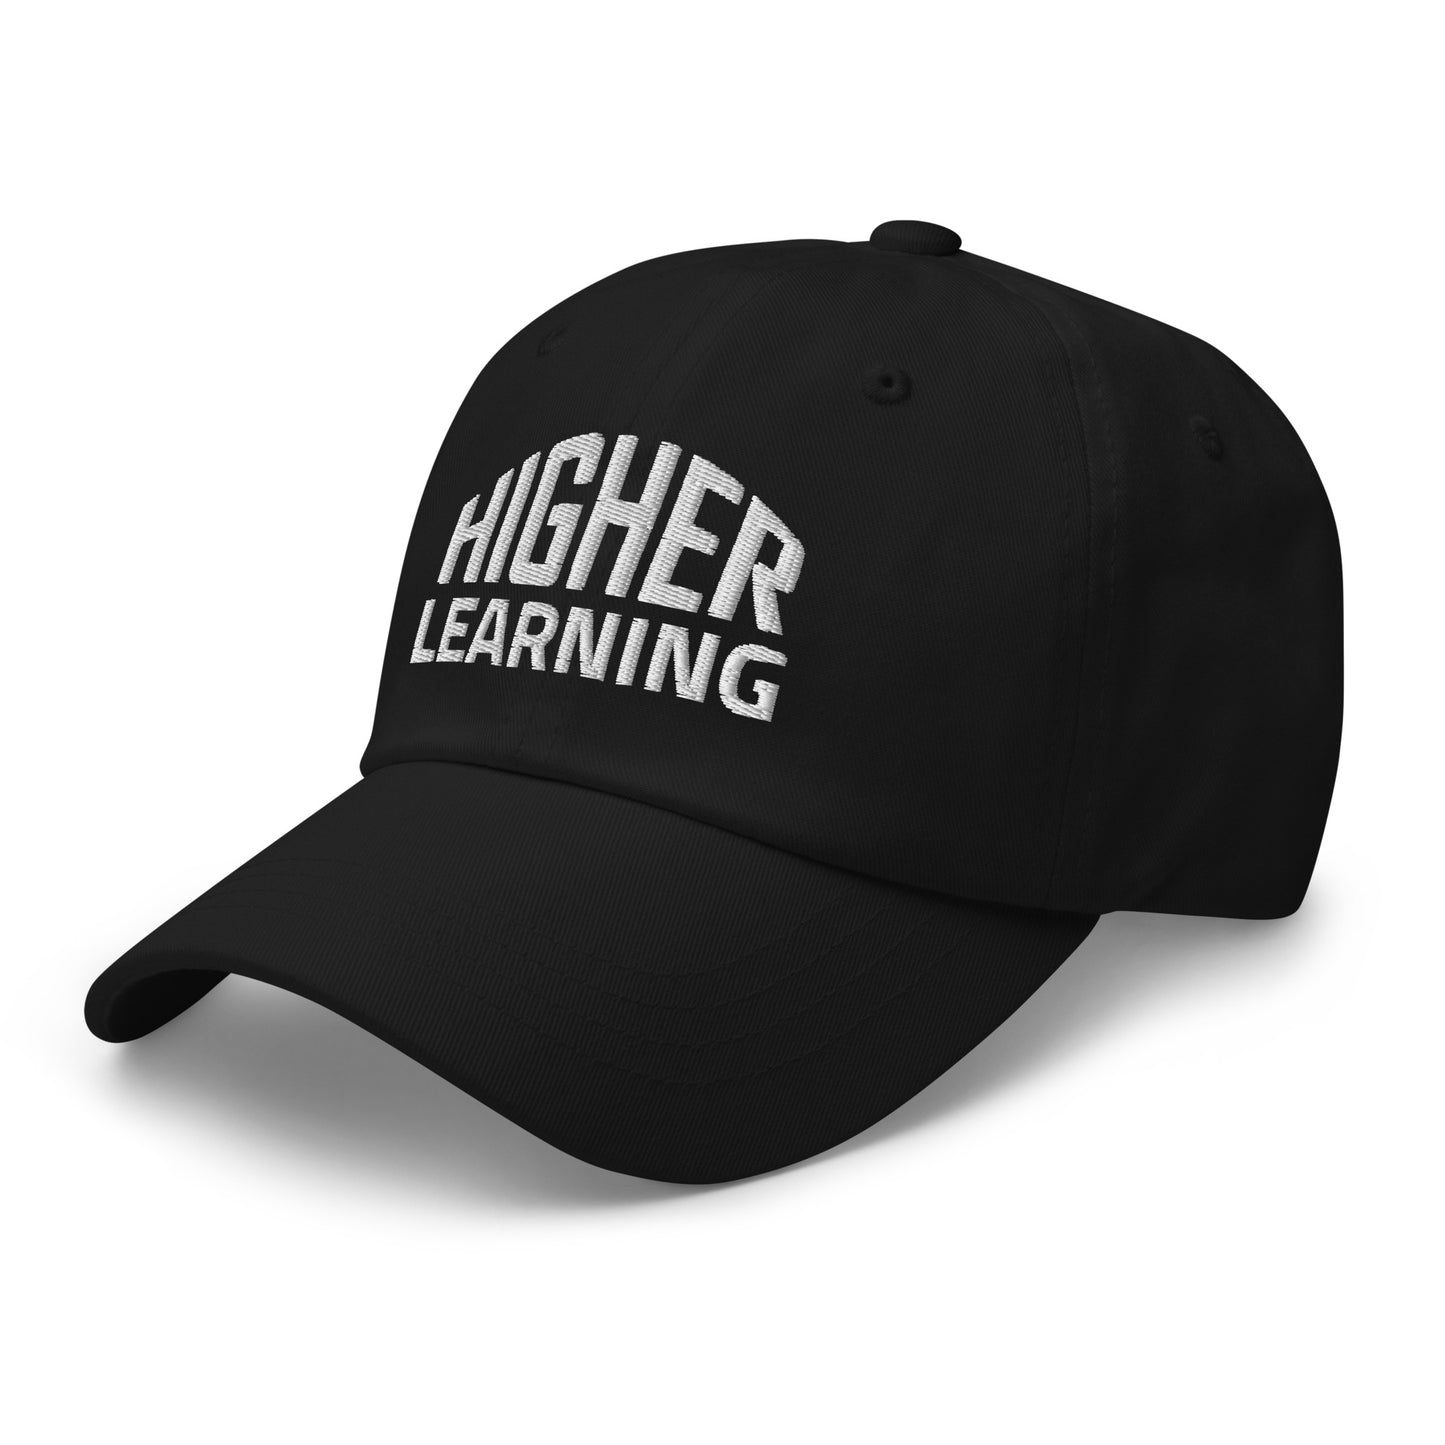 Higher Learning Hat